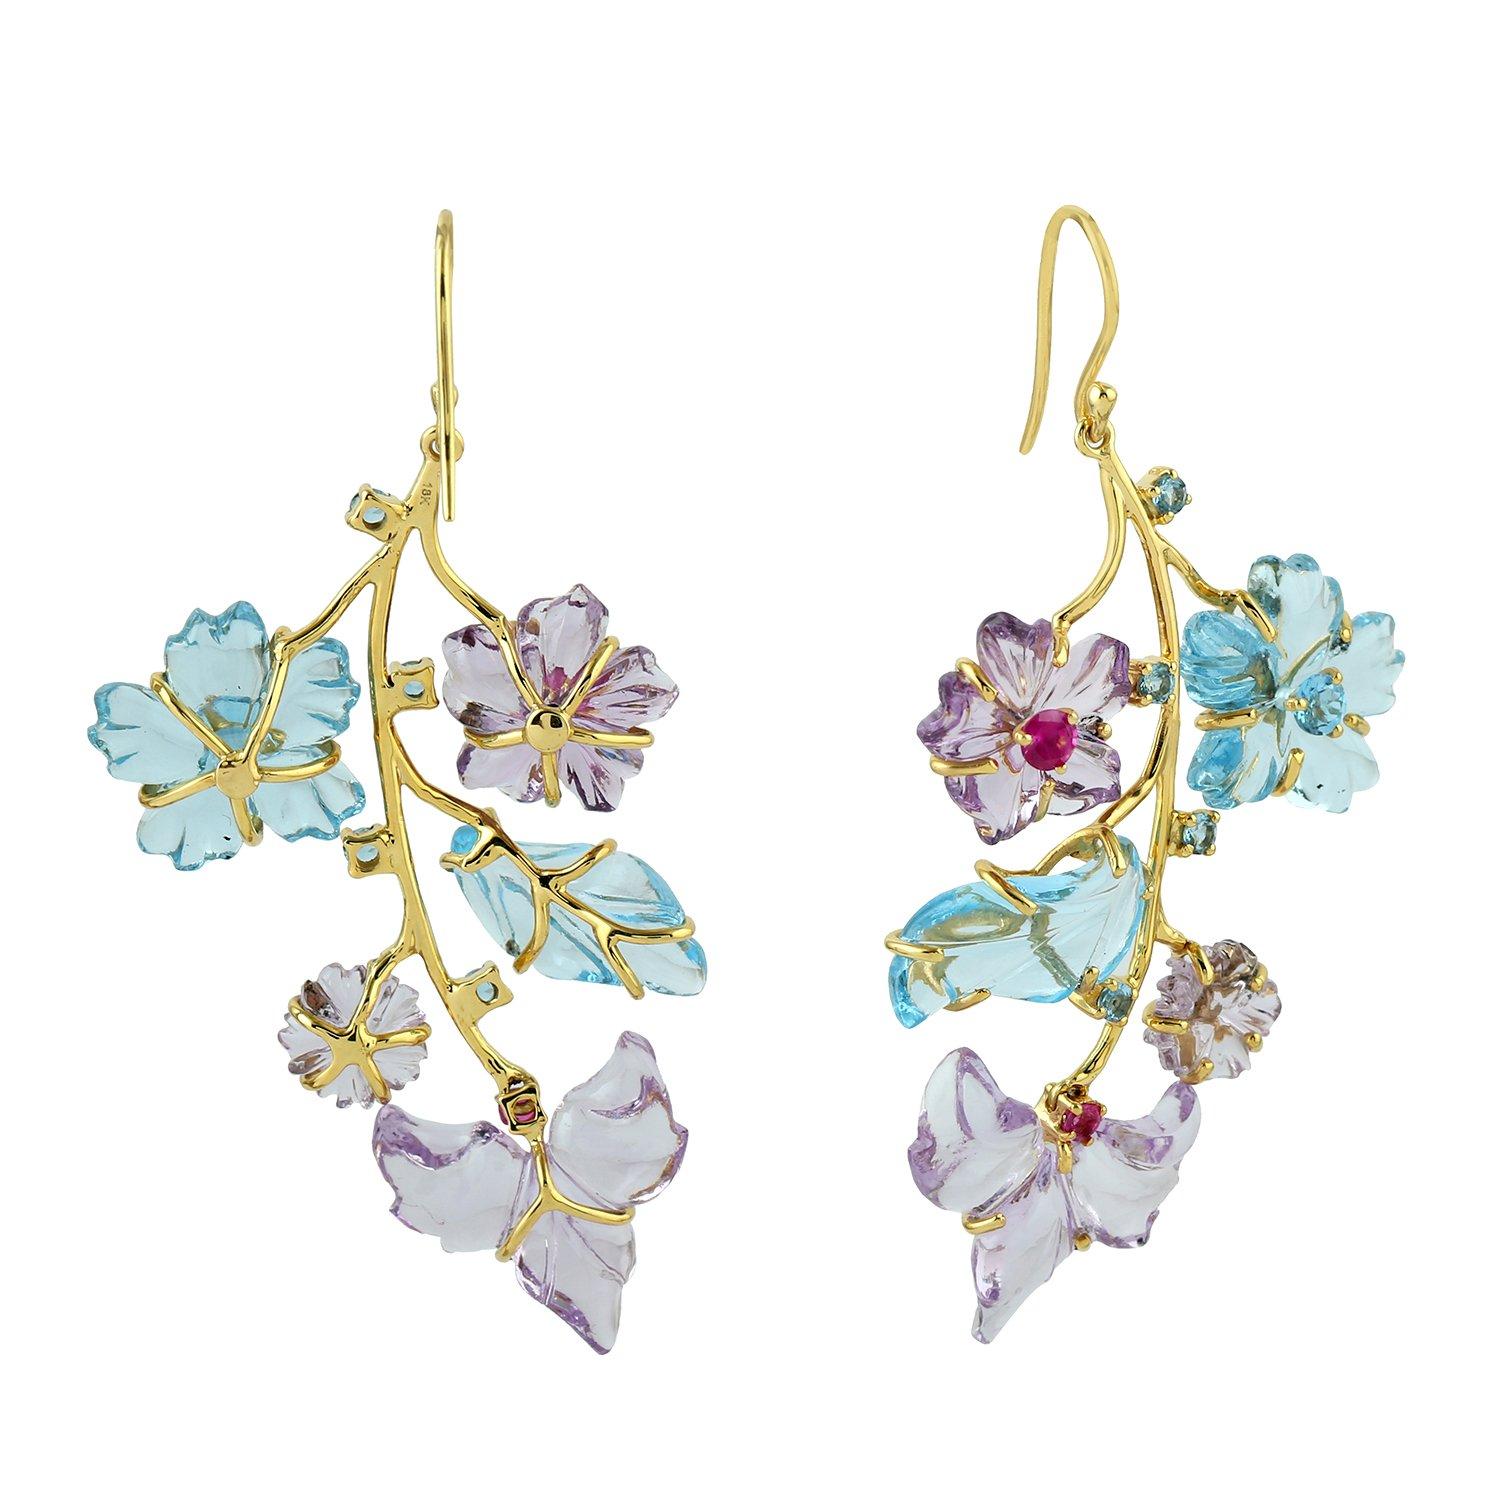 Cast in 18-karat gold. These beautiful earrings are set with 15.82 carats hand carved amethyst, topaz and .46 carats ruby.  See other flower collection matching pieces.

FOLLOW  MEGHNA JEWELS storefront to view the latest collection & exclusive